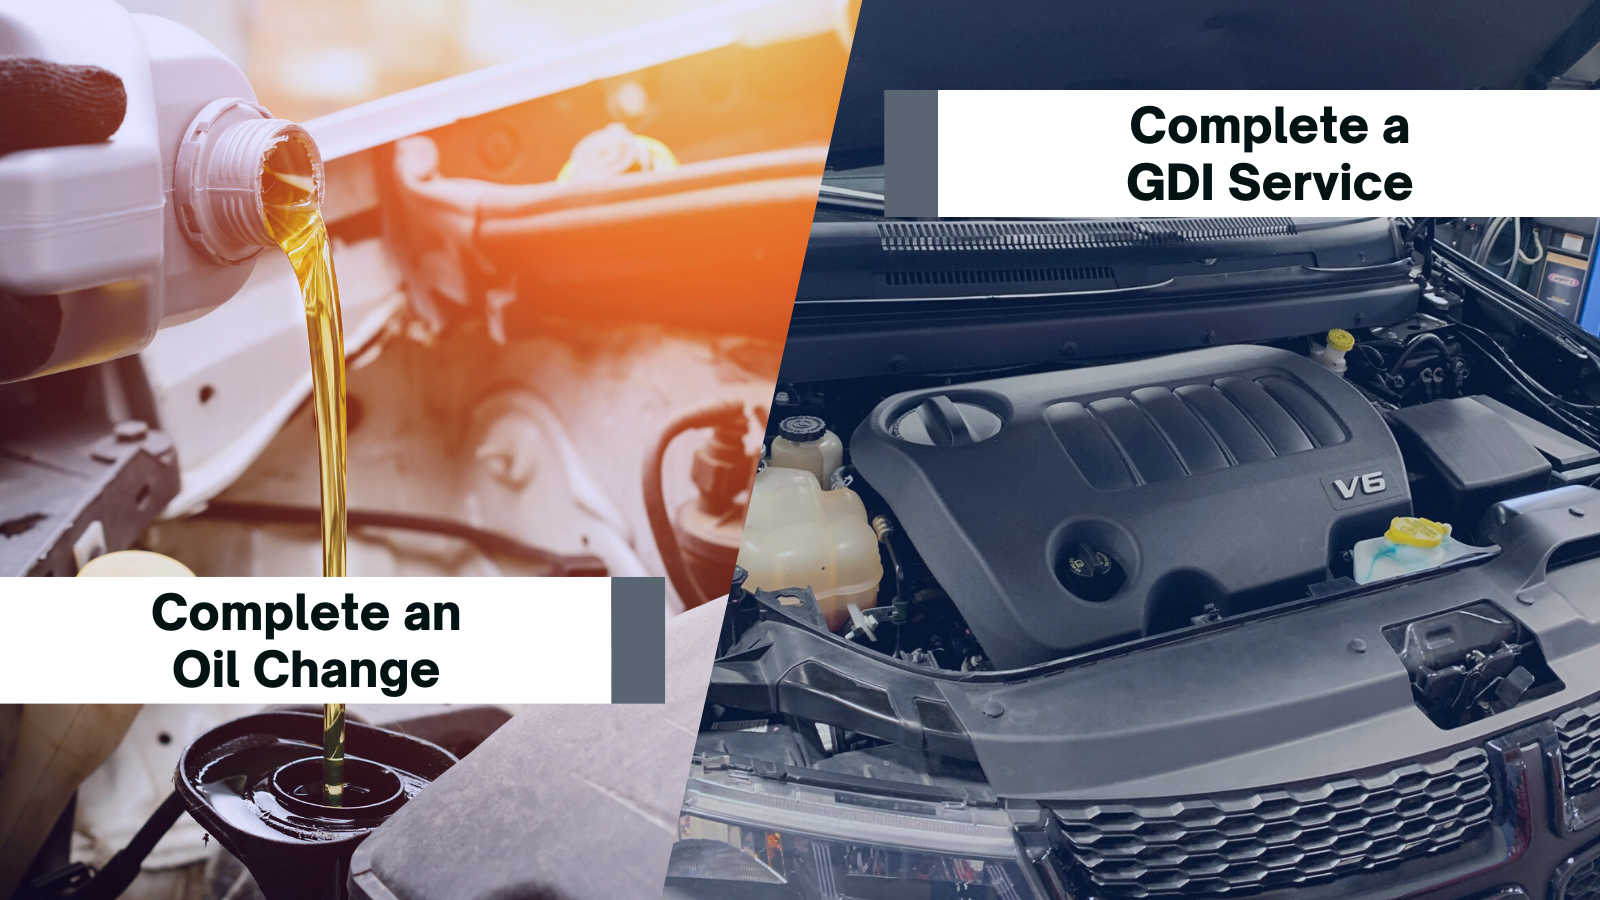 Complete an Oil Change and a GDI Service at Graham Auto Repair